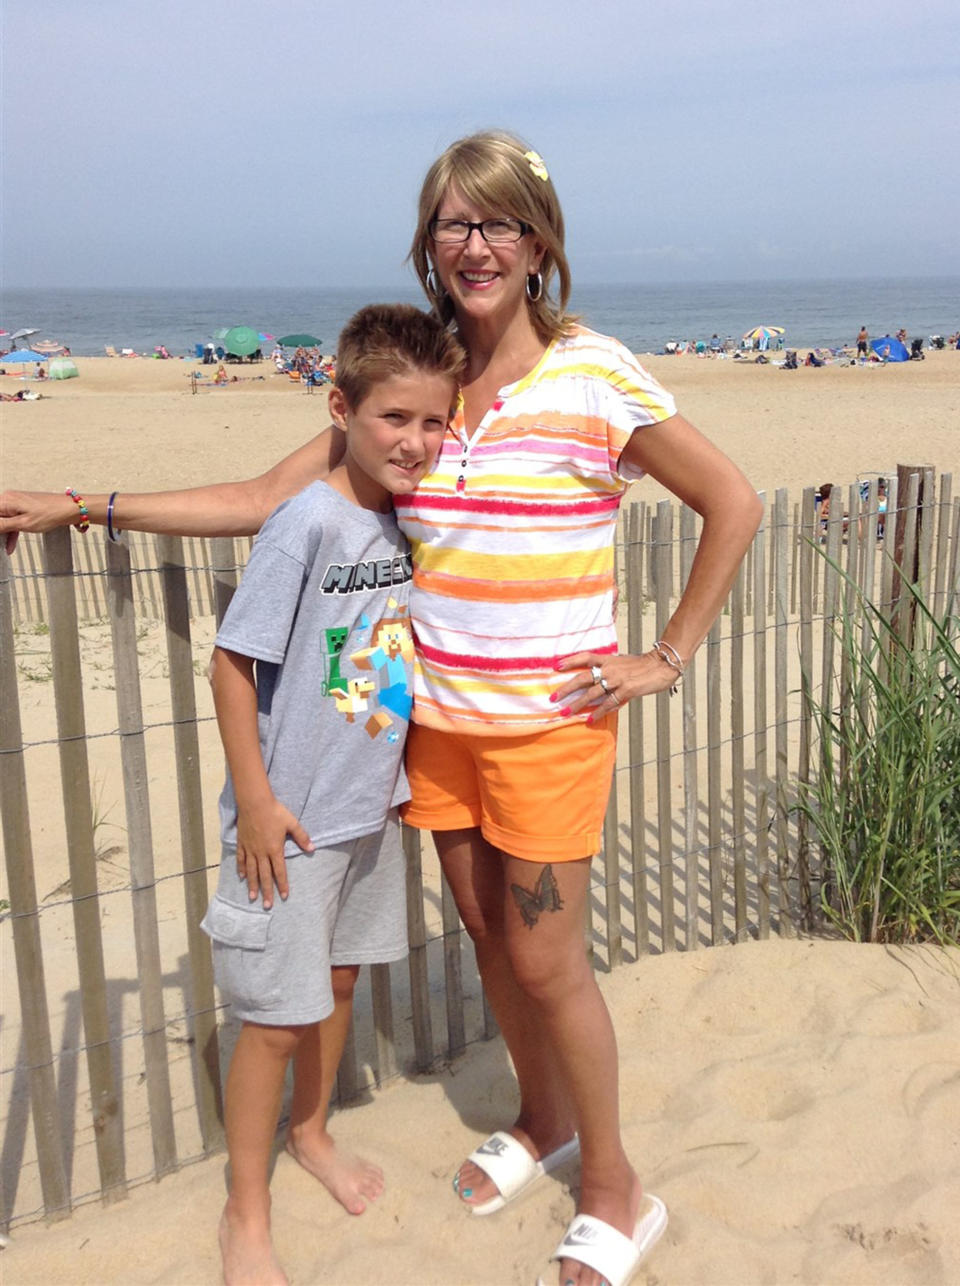 Wesley and his mom, Tricia Somers, share a happy moment on the beach. (Tricia Somers)